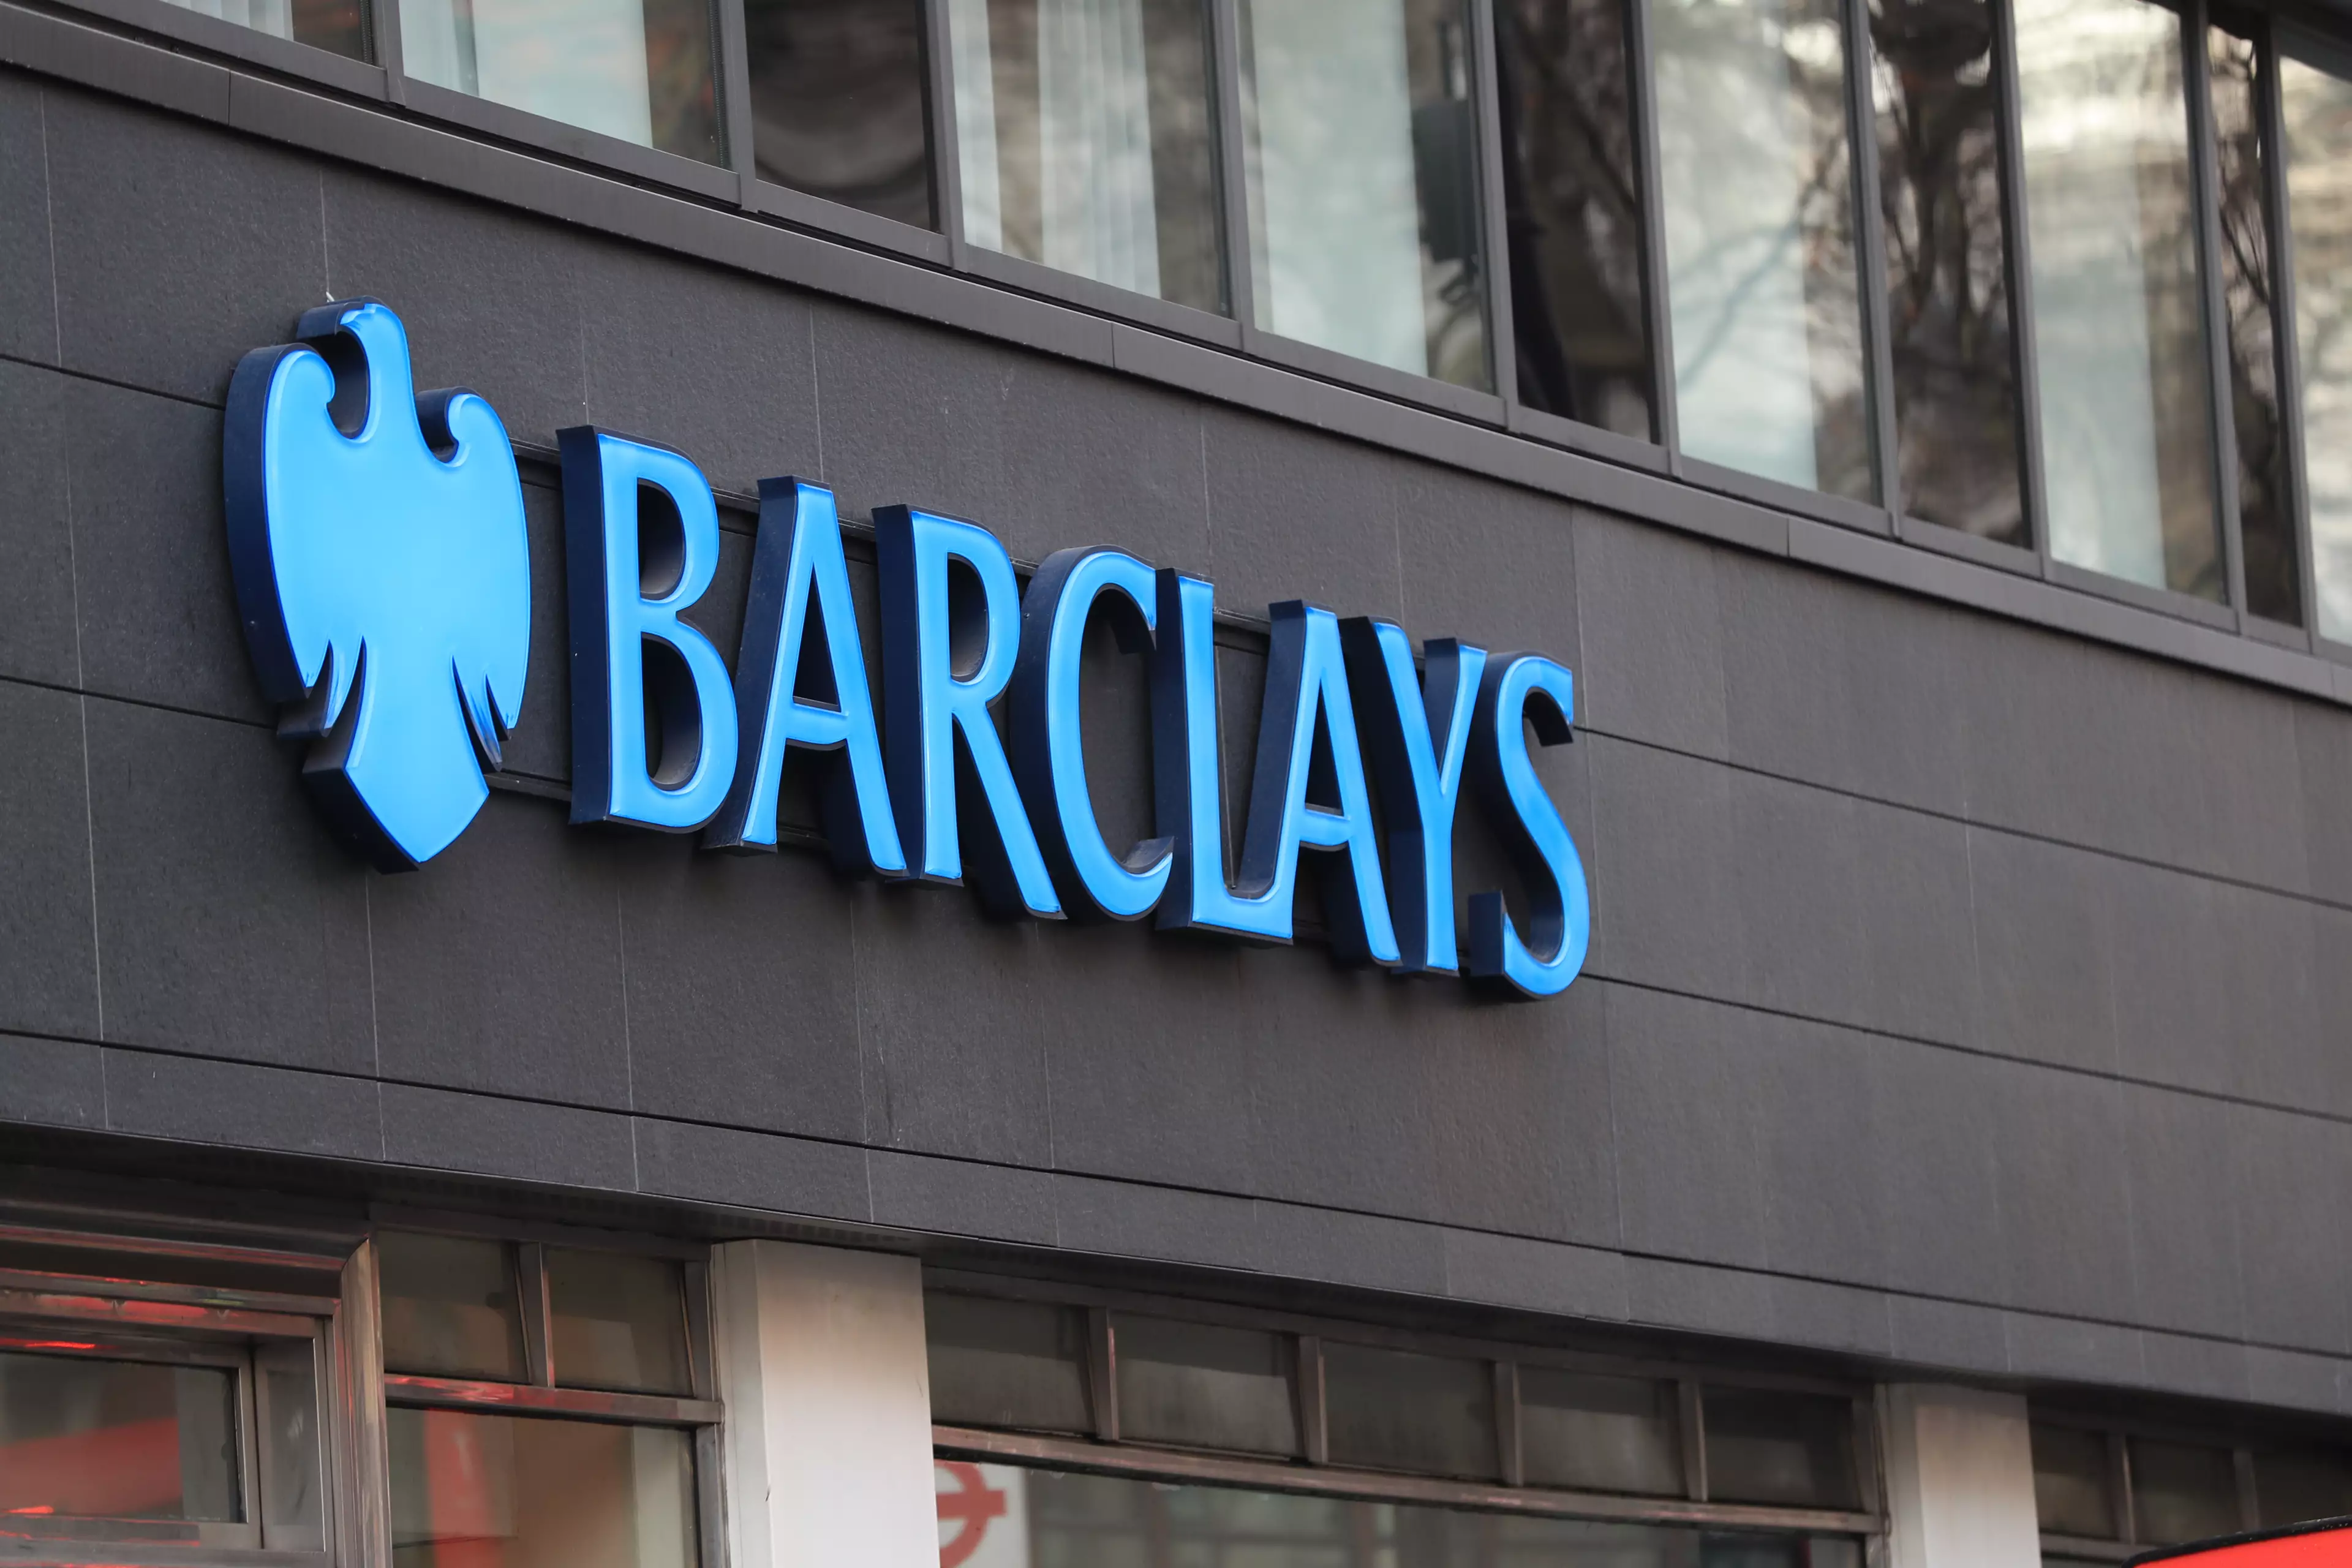 Barclays Family Springboard could be good news, if you've got a generous family member willing to help out.